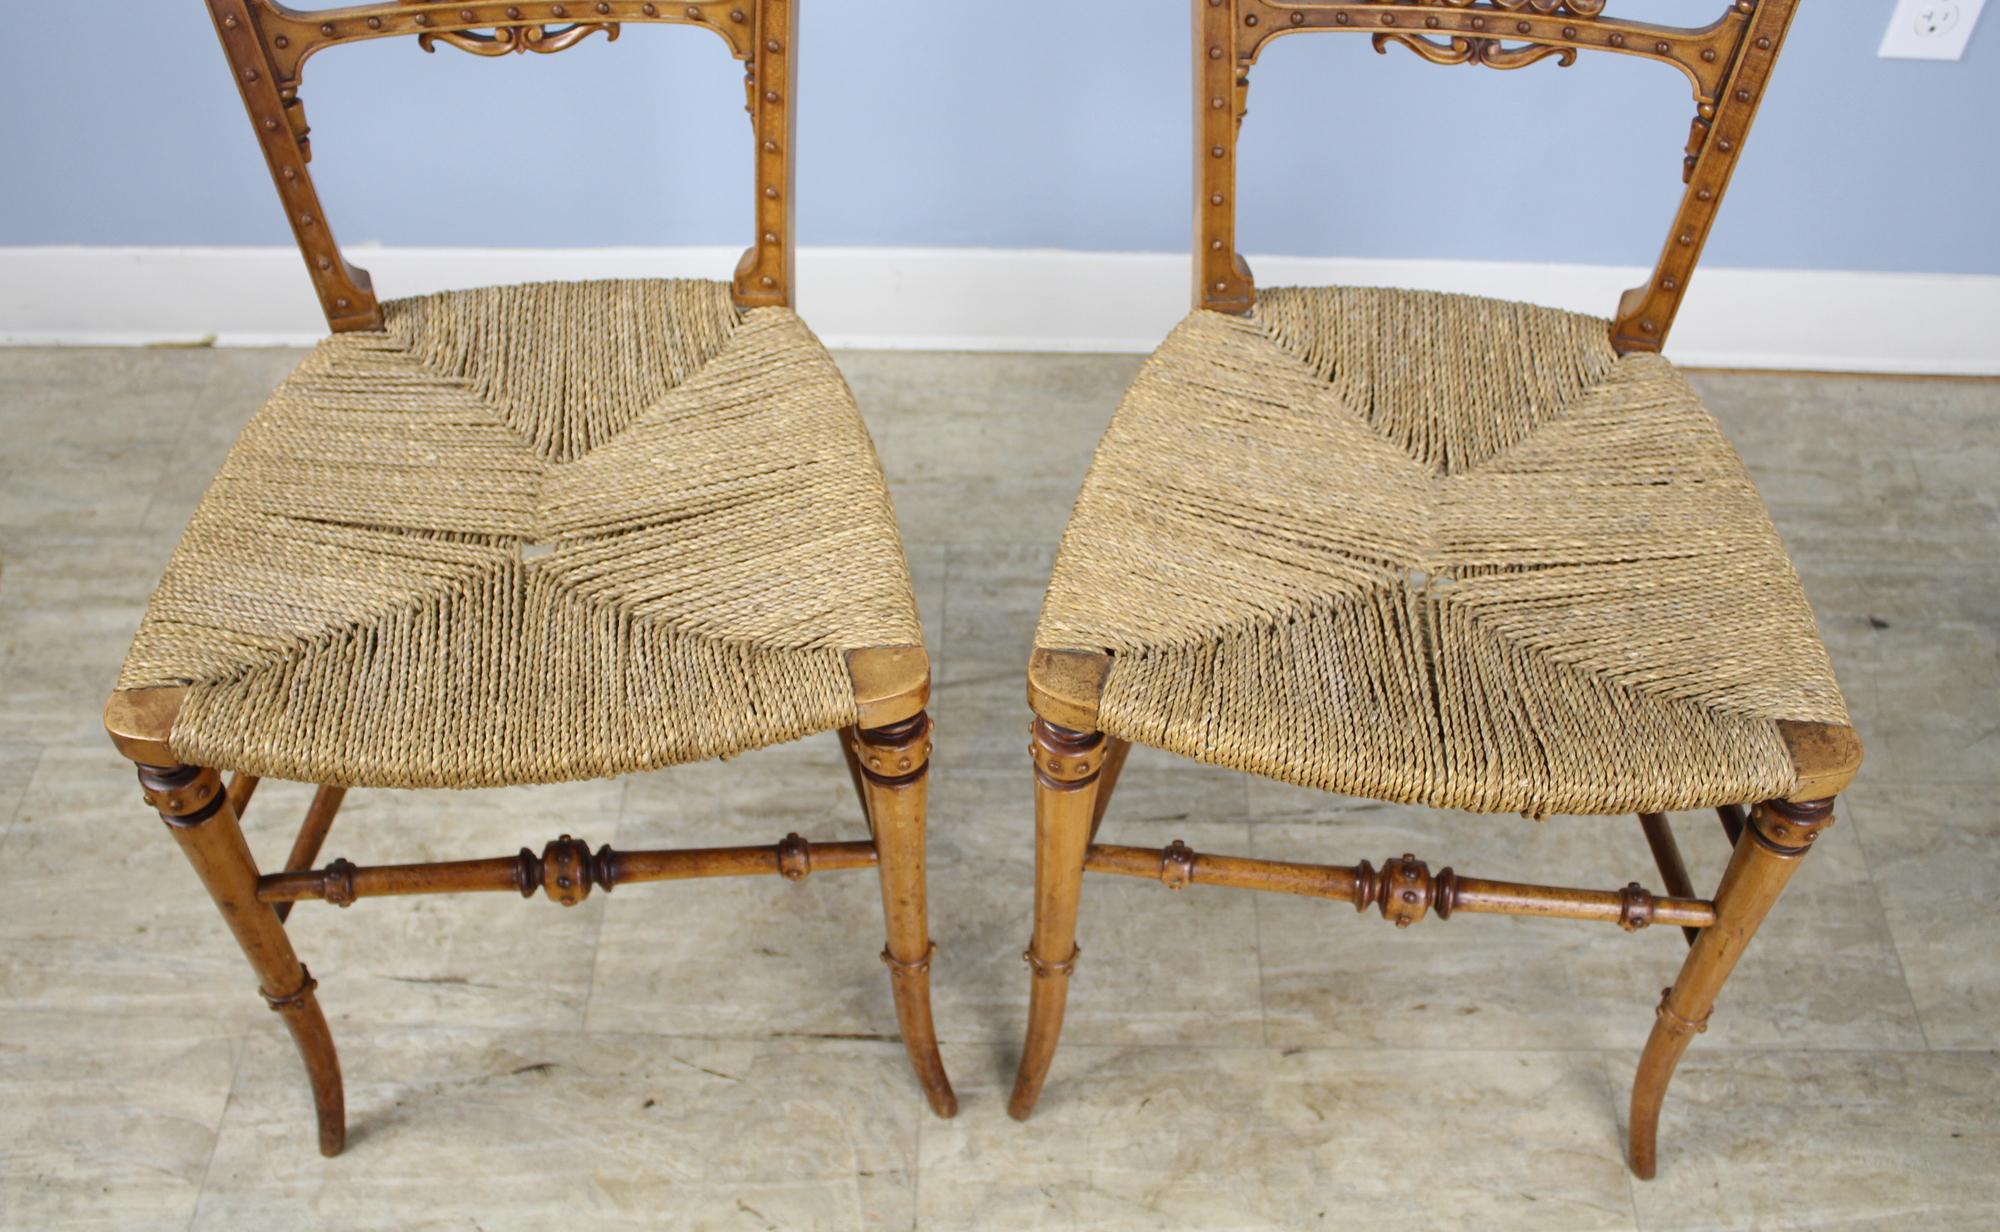 An unusually pretty pair of intricately carved German bedroom chairs. We believe them to be fashioned of yew wood. The seats, made of woven rope, are in very nice antique condition. These would be divine on either side of a chest of drawers or as